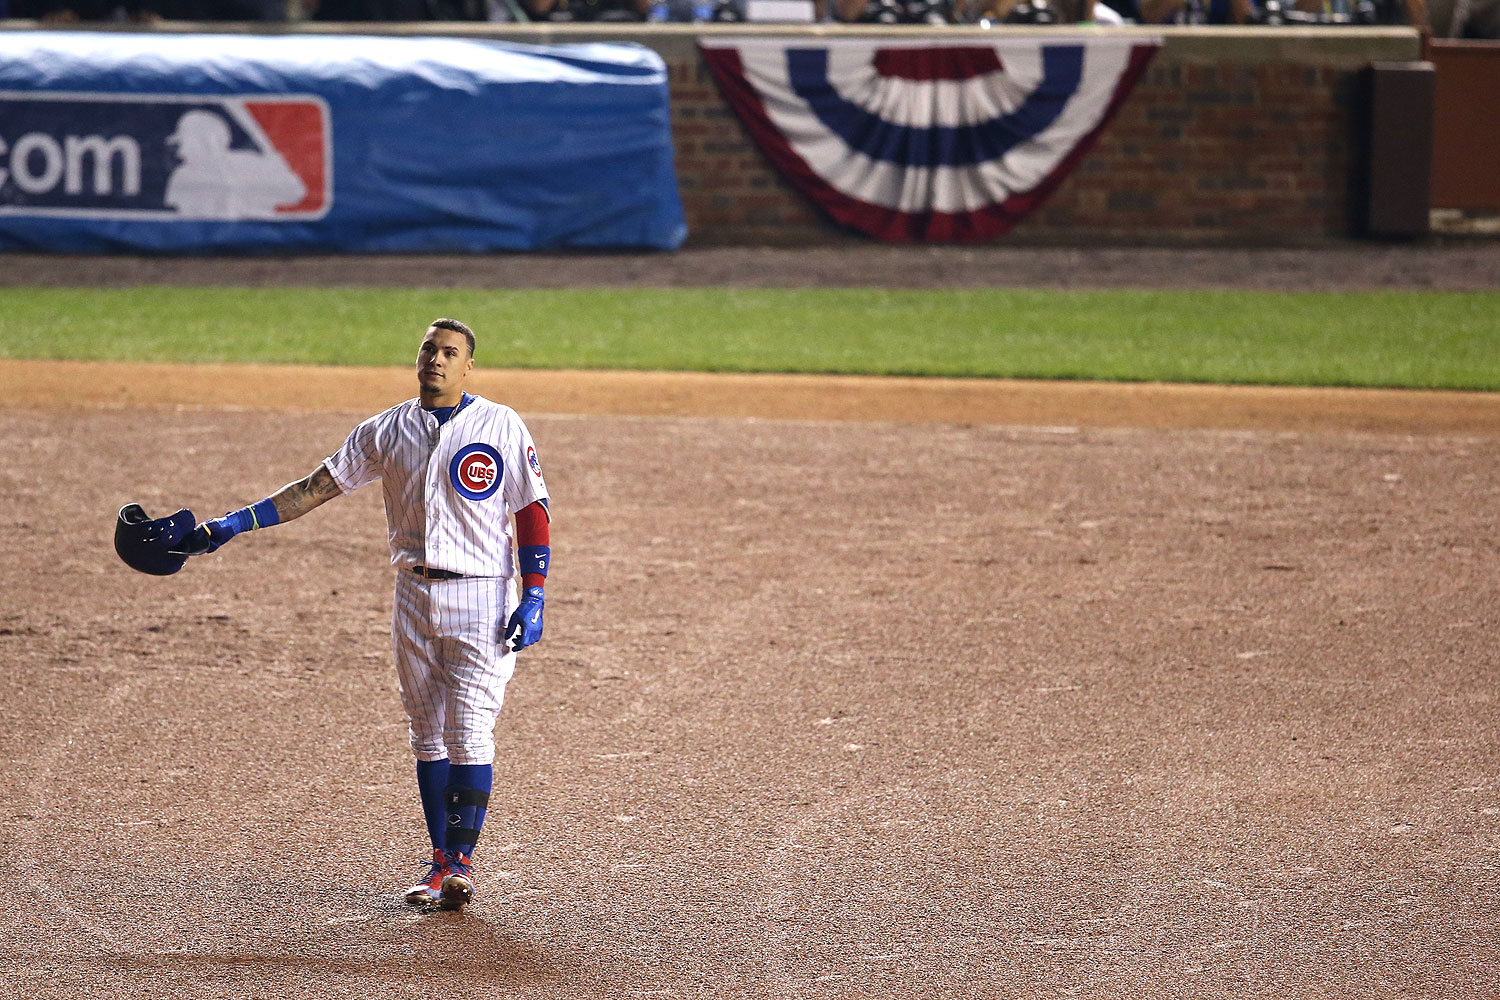 How Close Was Javy Baez to Winning Last Night's Game? Real Close